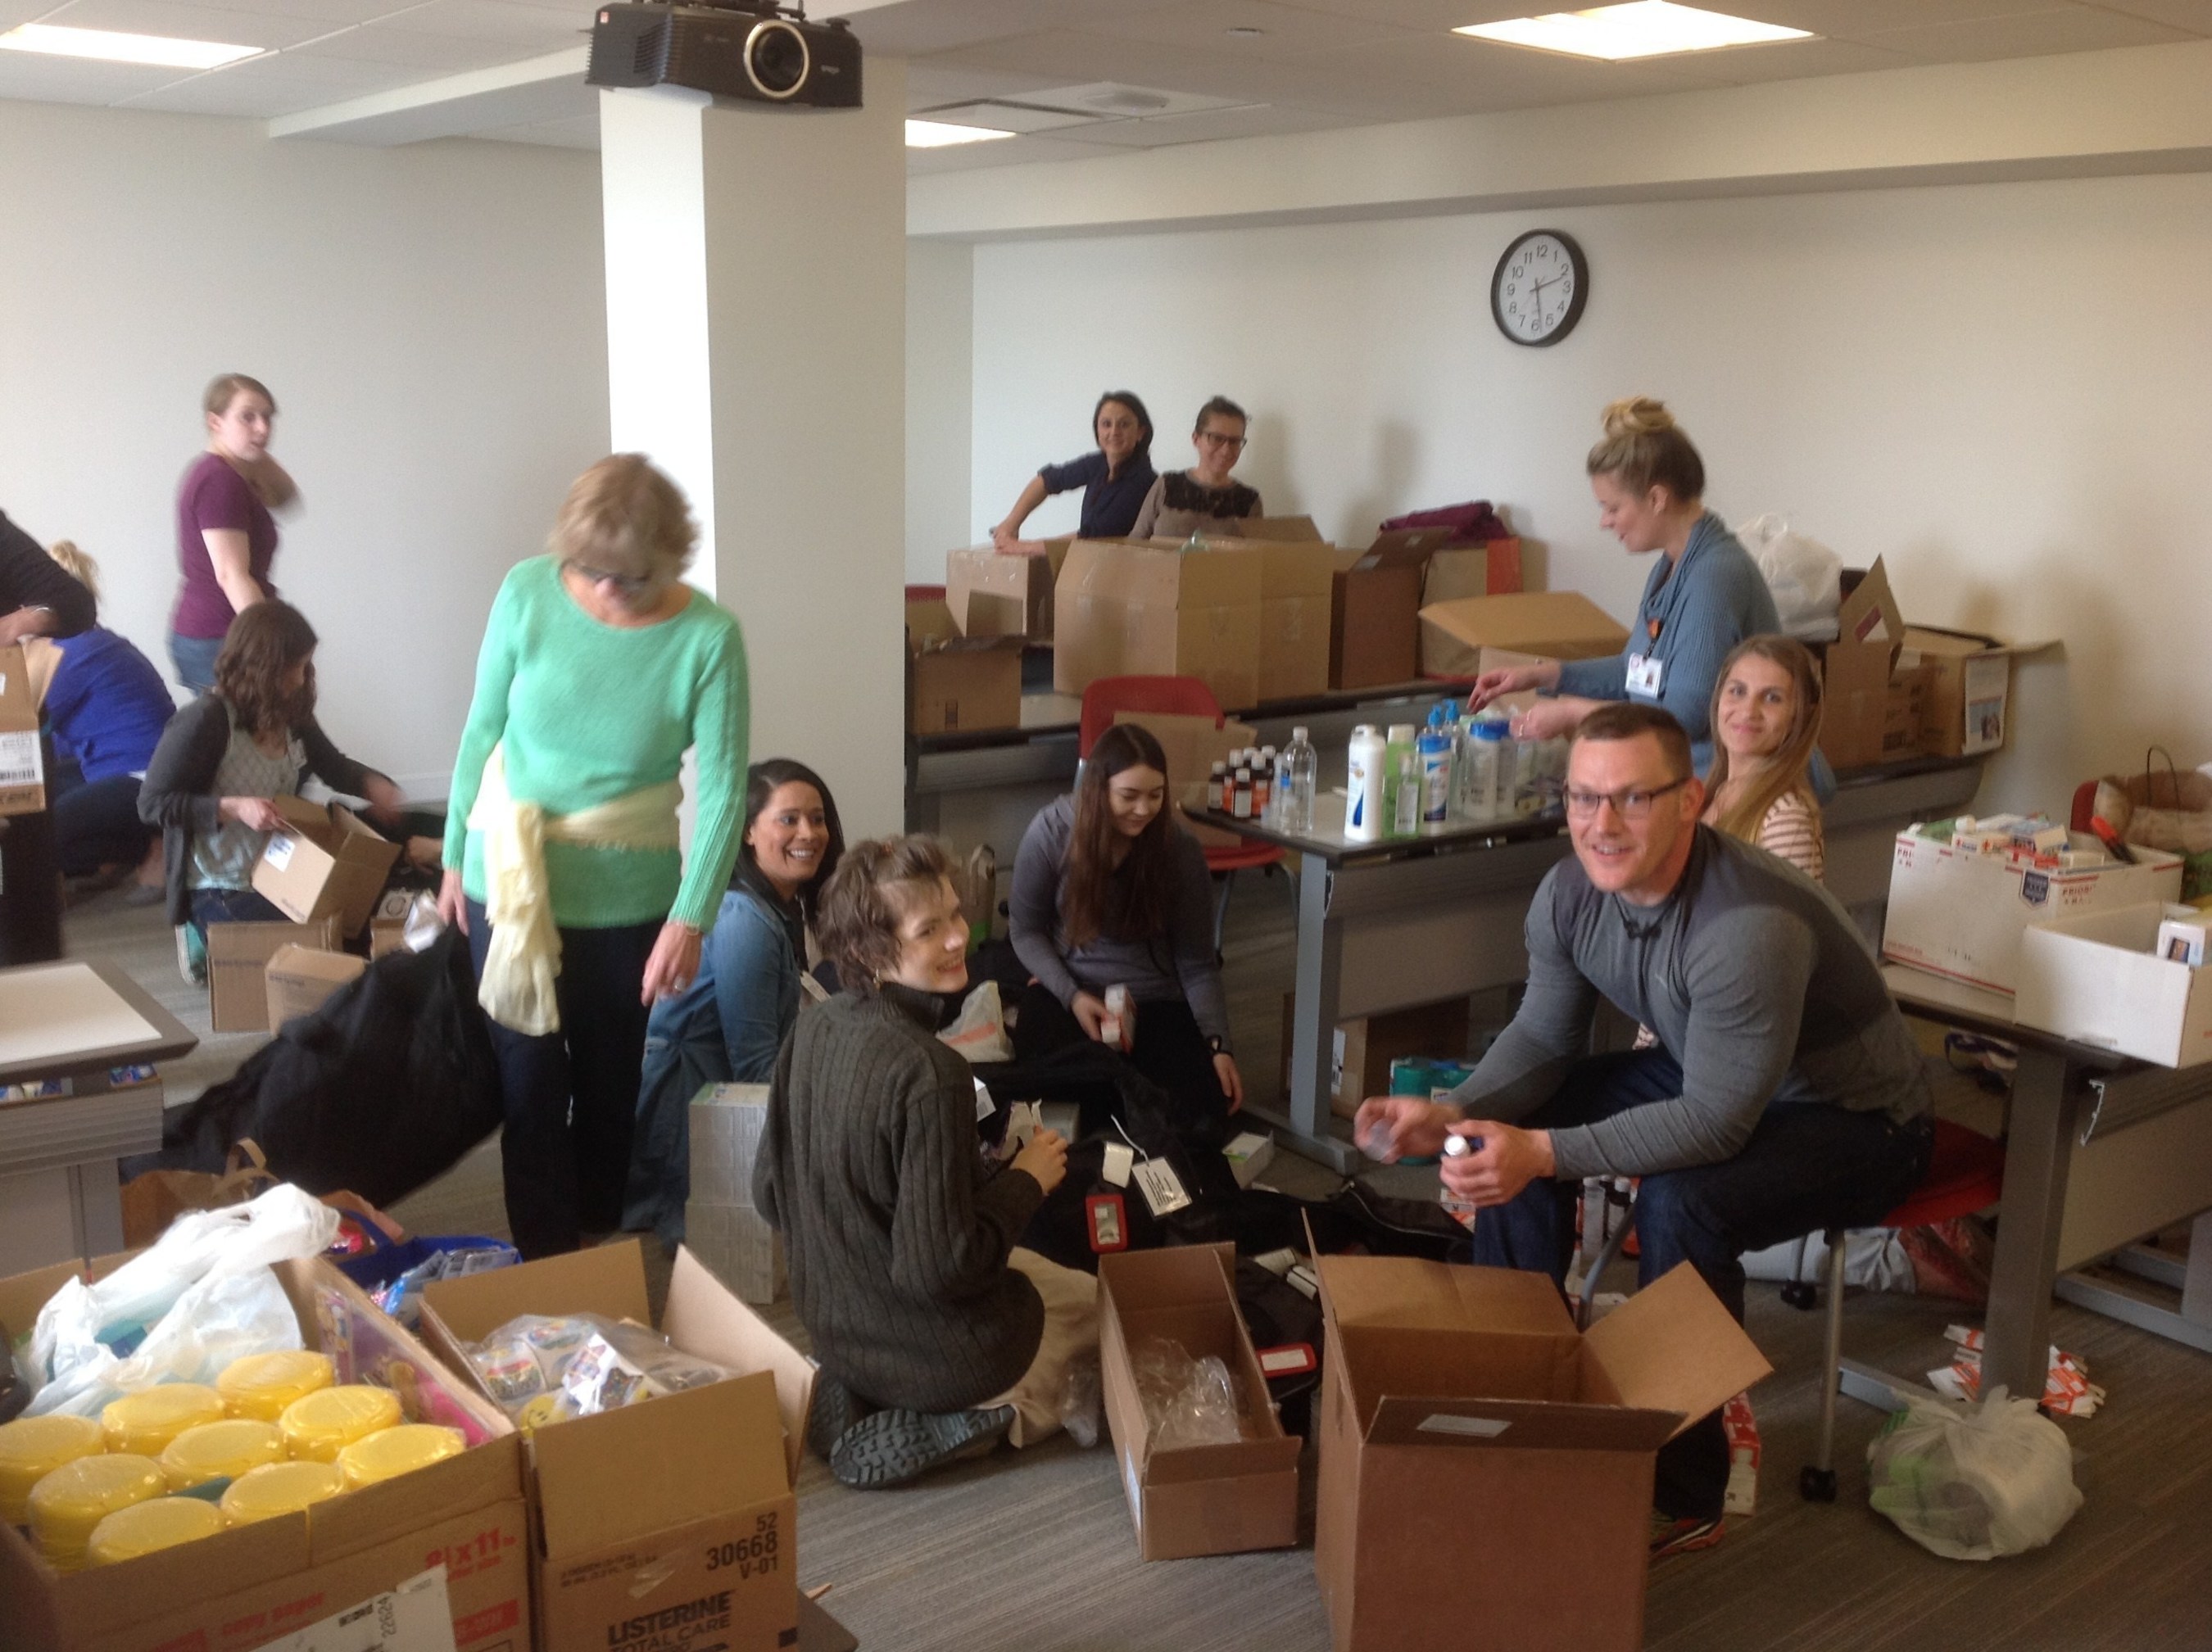 Resurrection University Nursing Students packing donations for Service Learning Trip to Honduras.